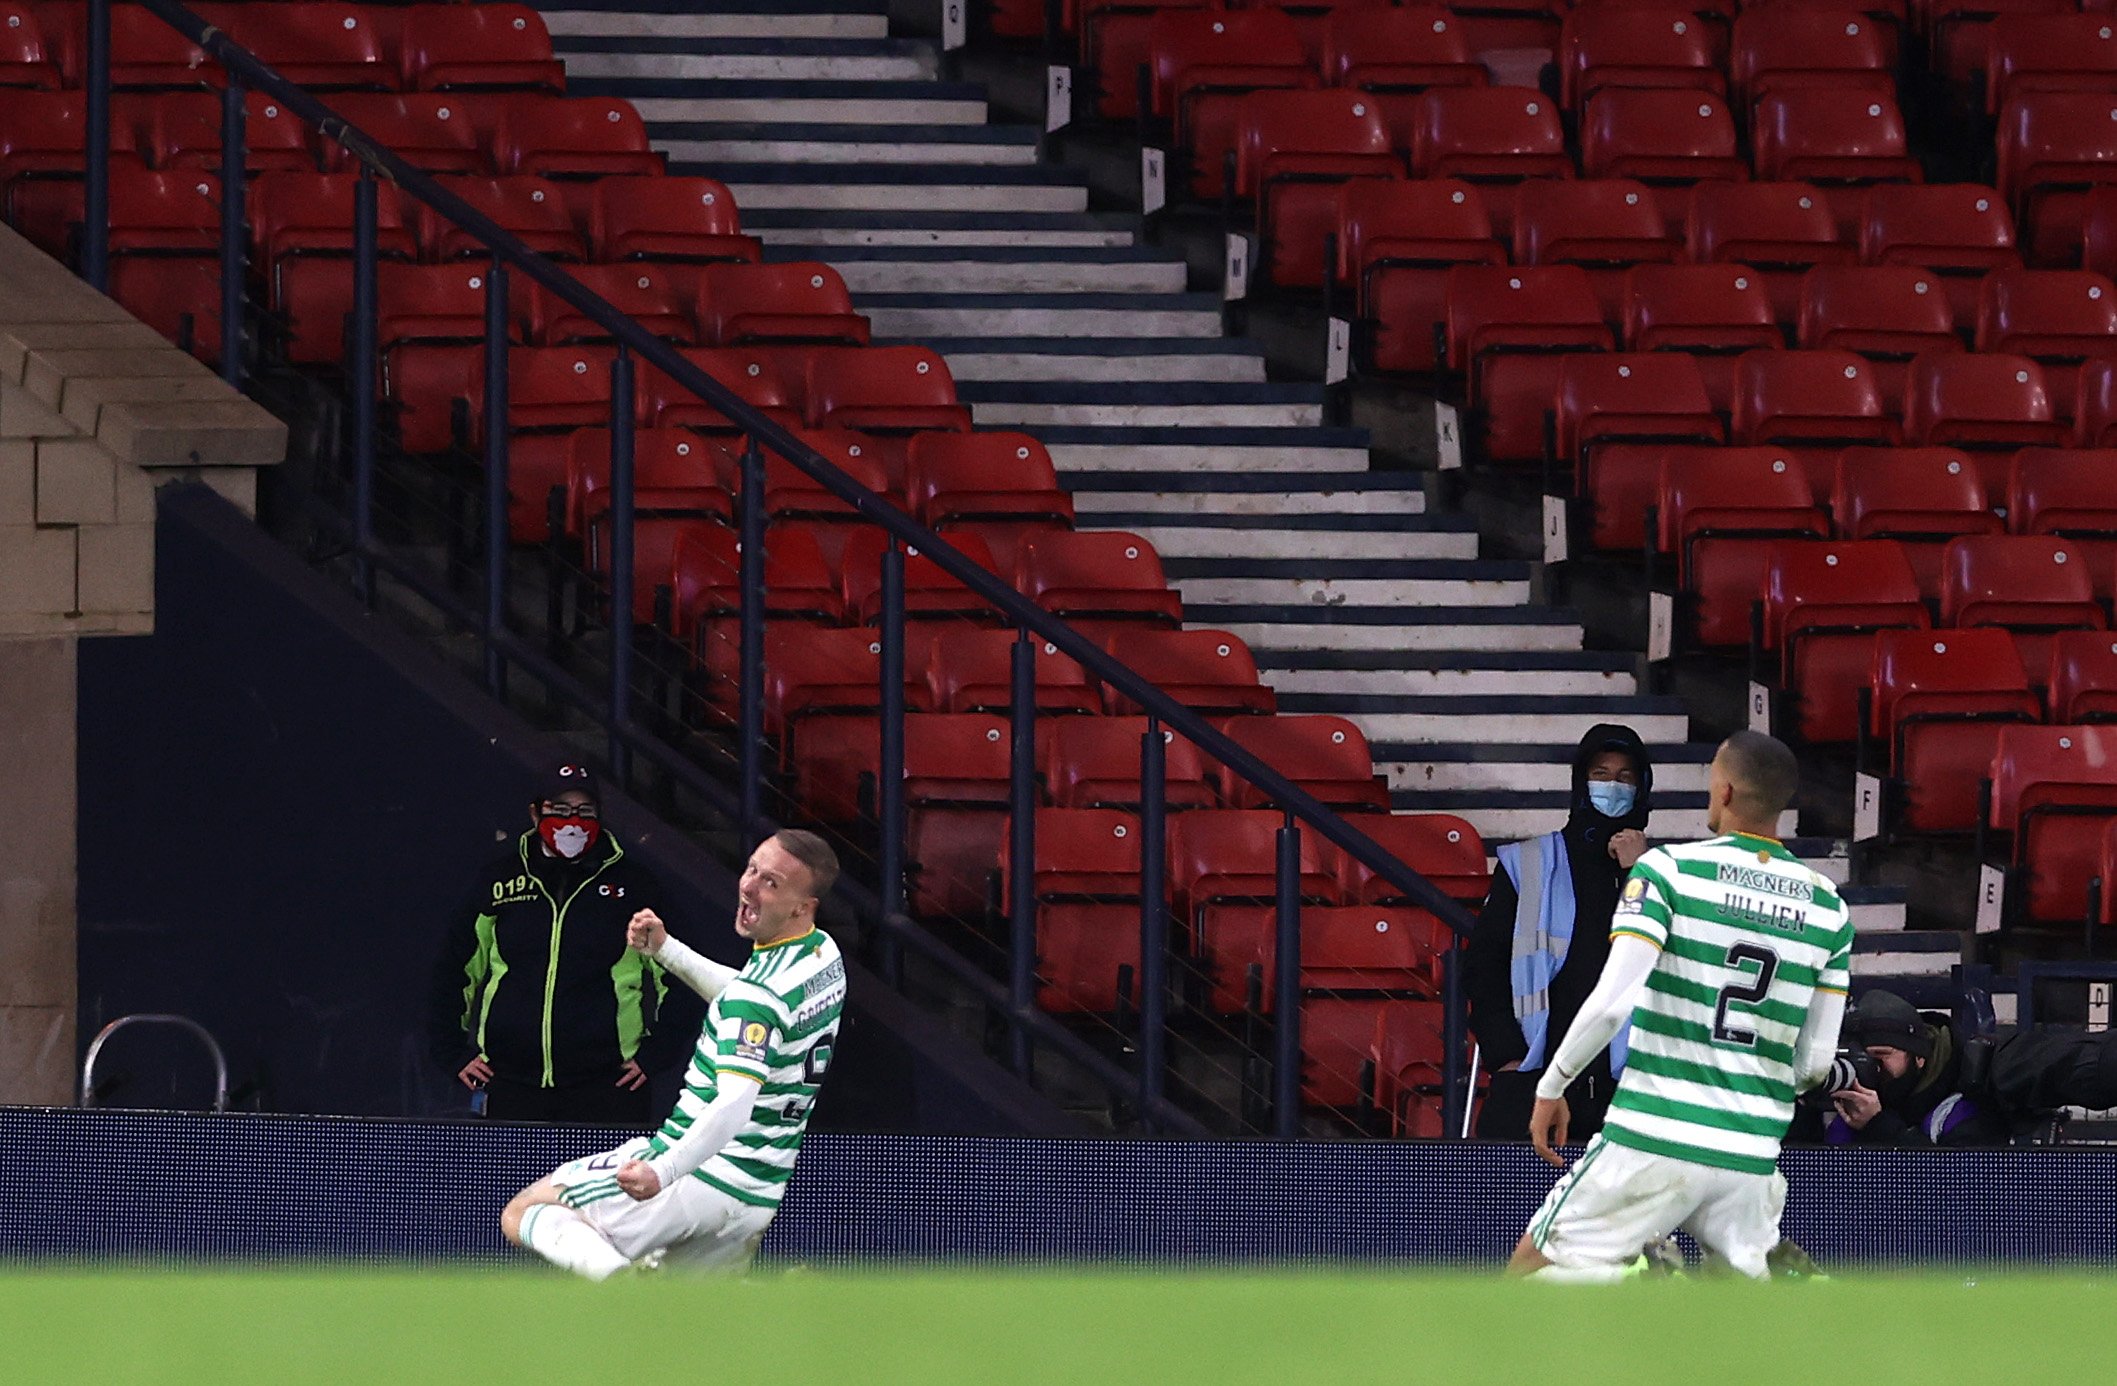 Celtic striker Leigh Griffiths' contract situation throws up some questions